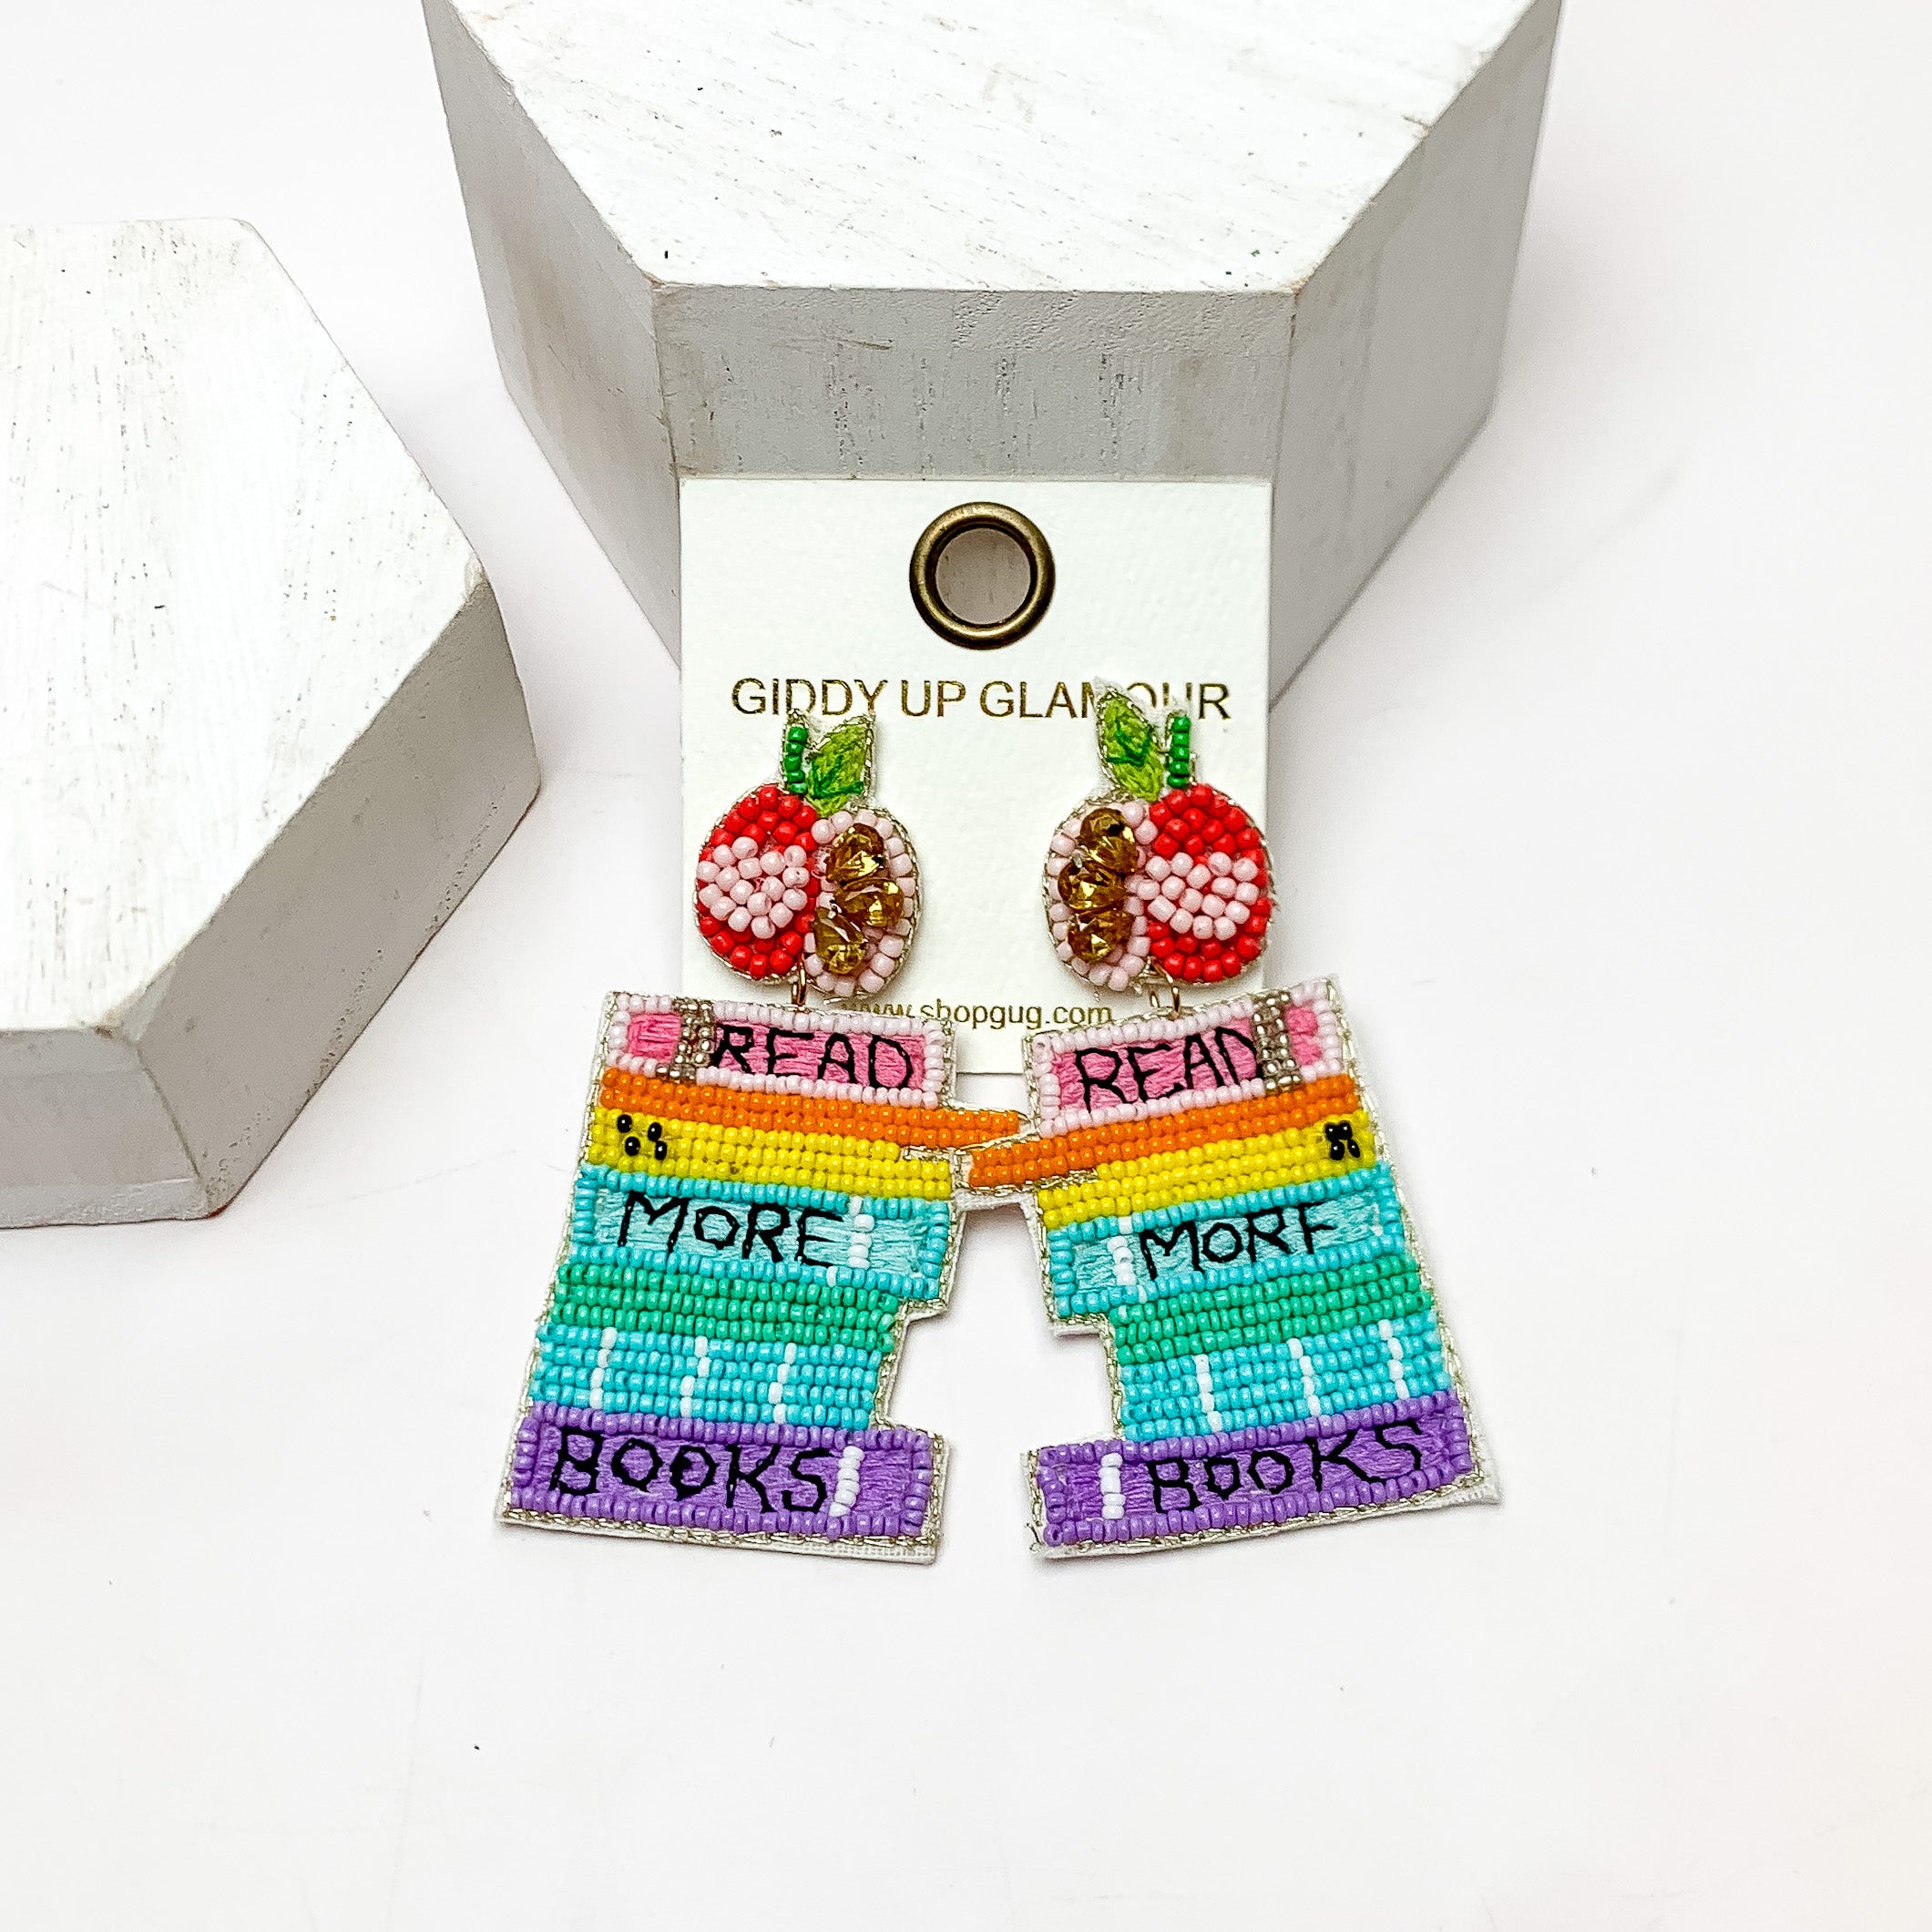 "Read More Books" Multicolor Beaded Earrings With Apple Posts. These earrings are on a white background and have white posts around them.